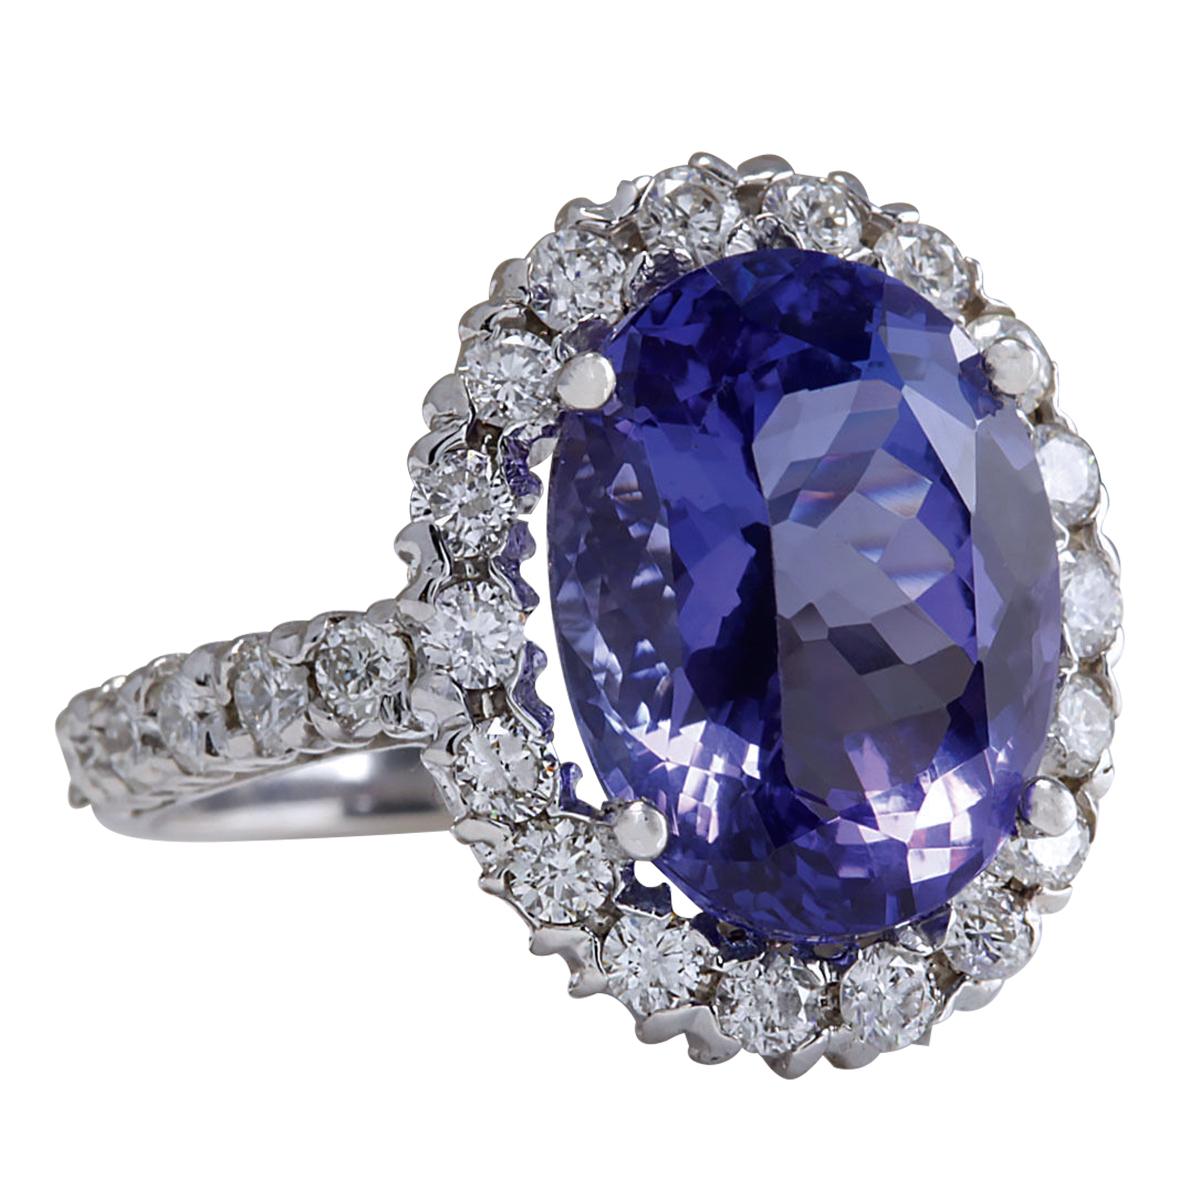 Introducing our exquisite 14 Karat White Gold Diamond Ring showcasing a magnificent 9.39 Carat Tanzanite, stamped with authenticity. Crafted with precision, this ring exudes elegance and sophistication. Weighing 5.5 grams, it features a captivating